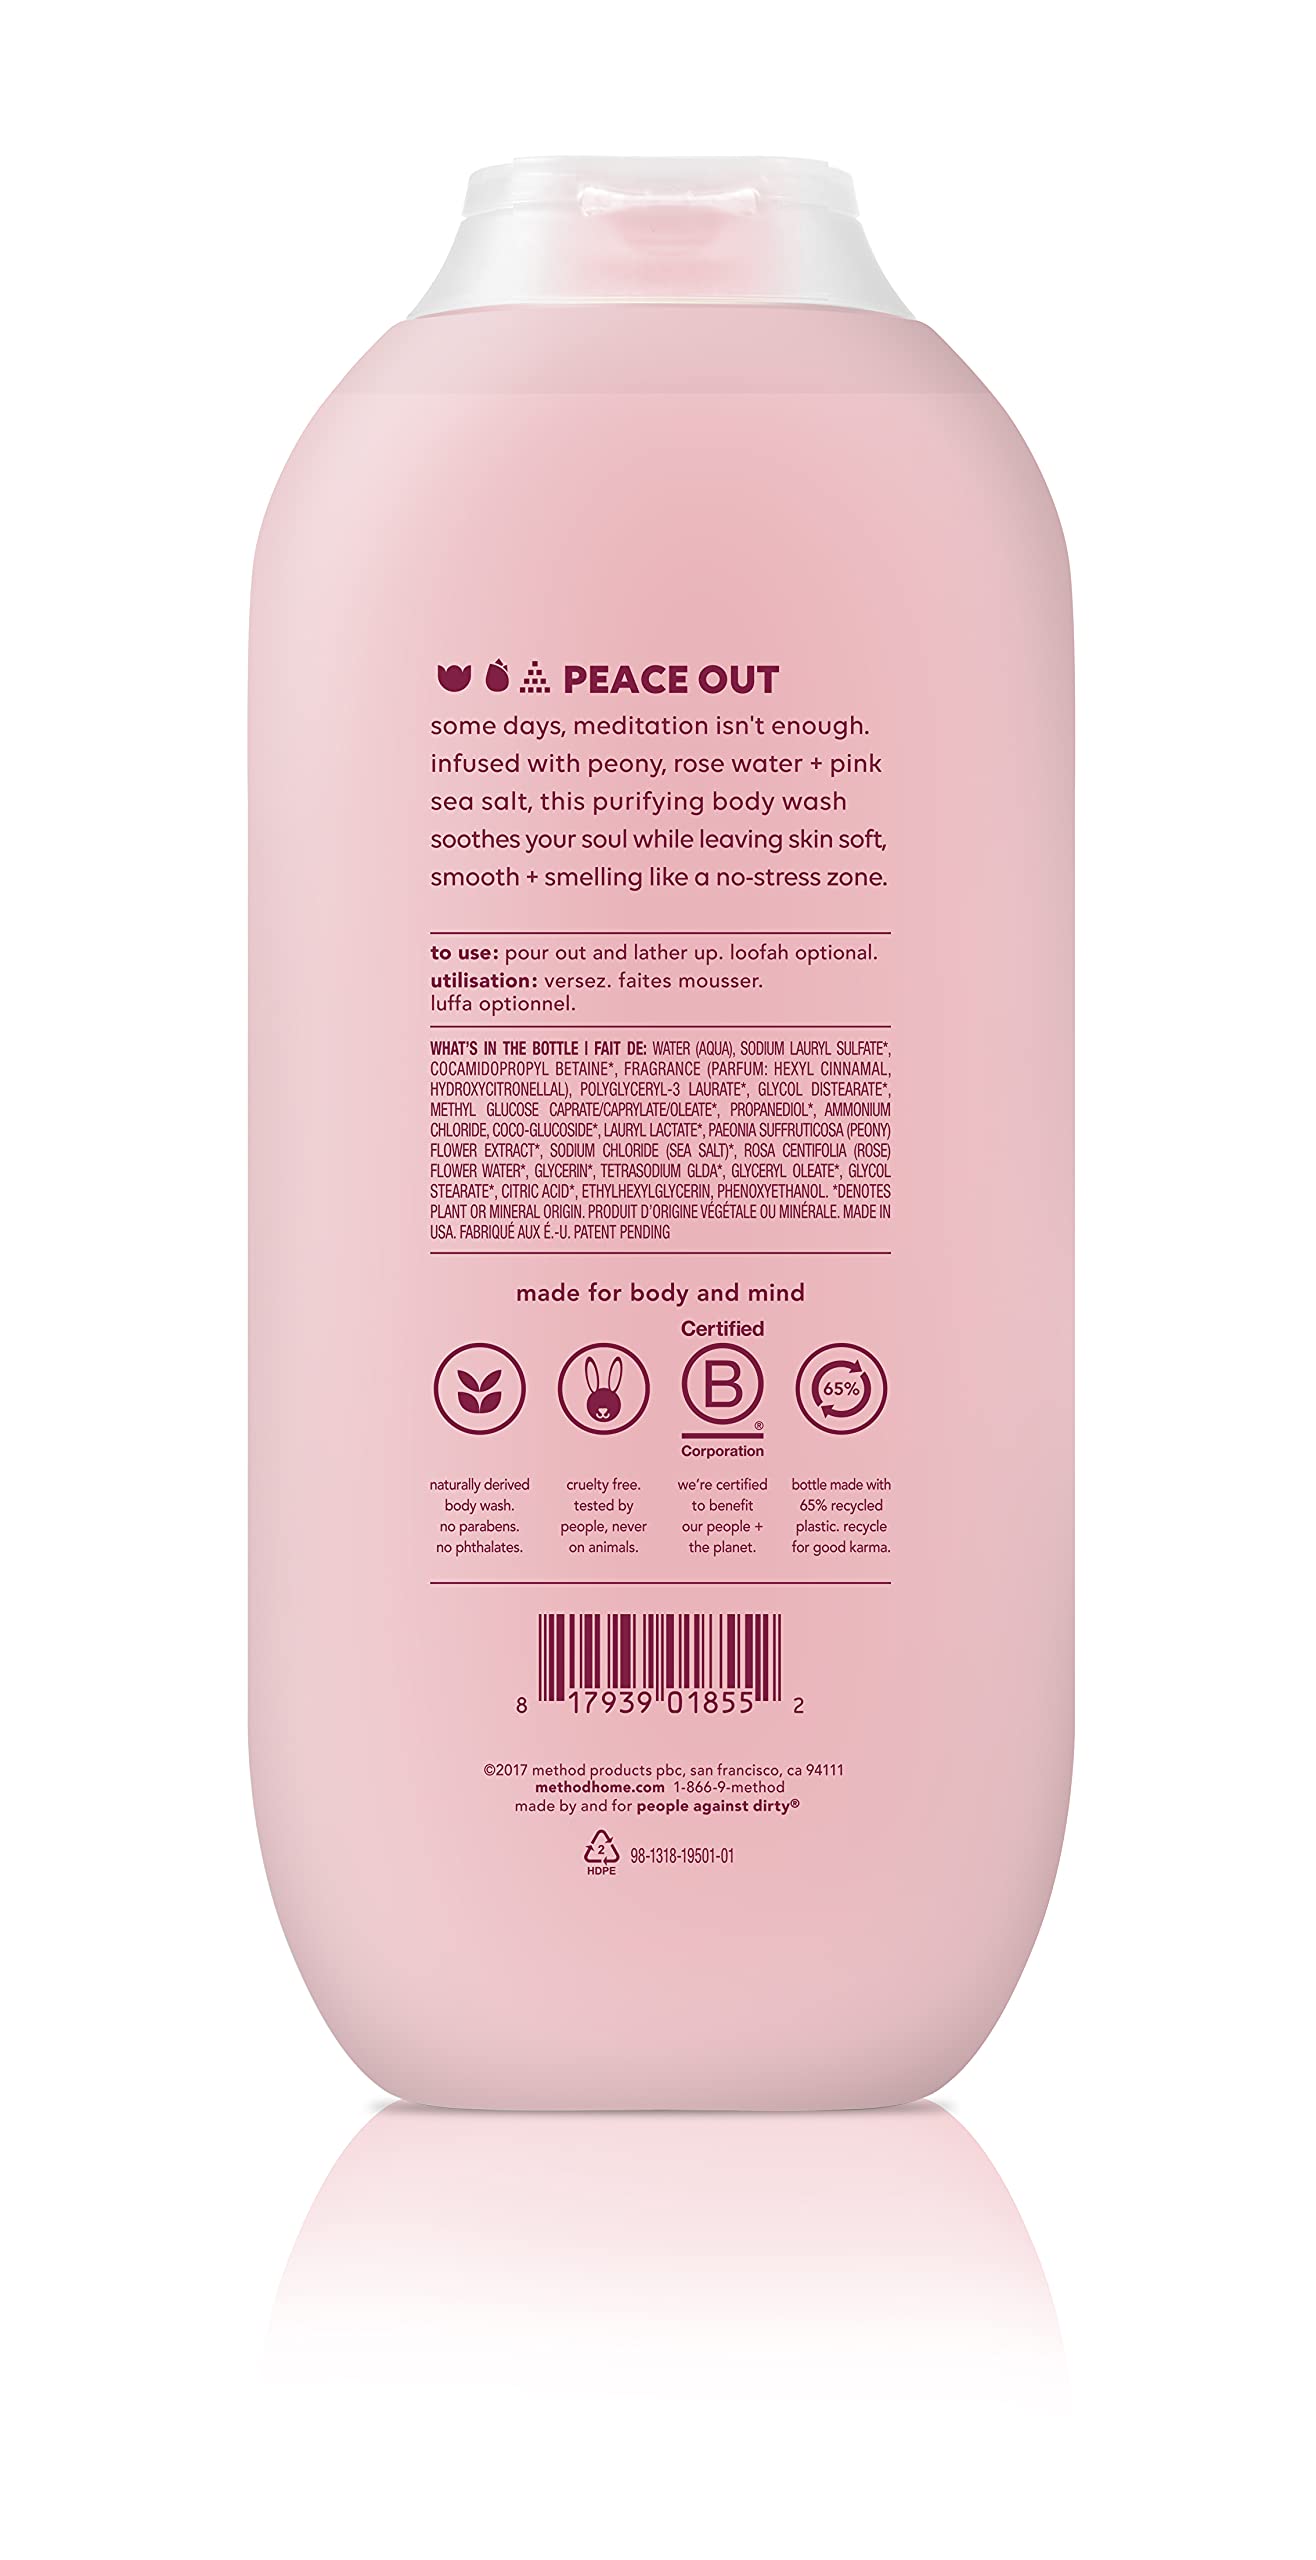 Method Body Wash, Pure Peace, Paraben and Phthalate Free, 18 oz (Pack of 3),Detoxifying